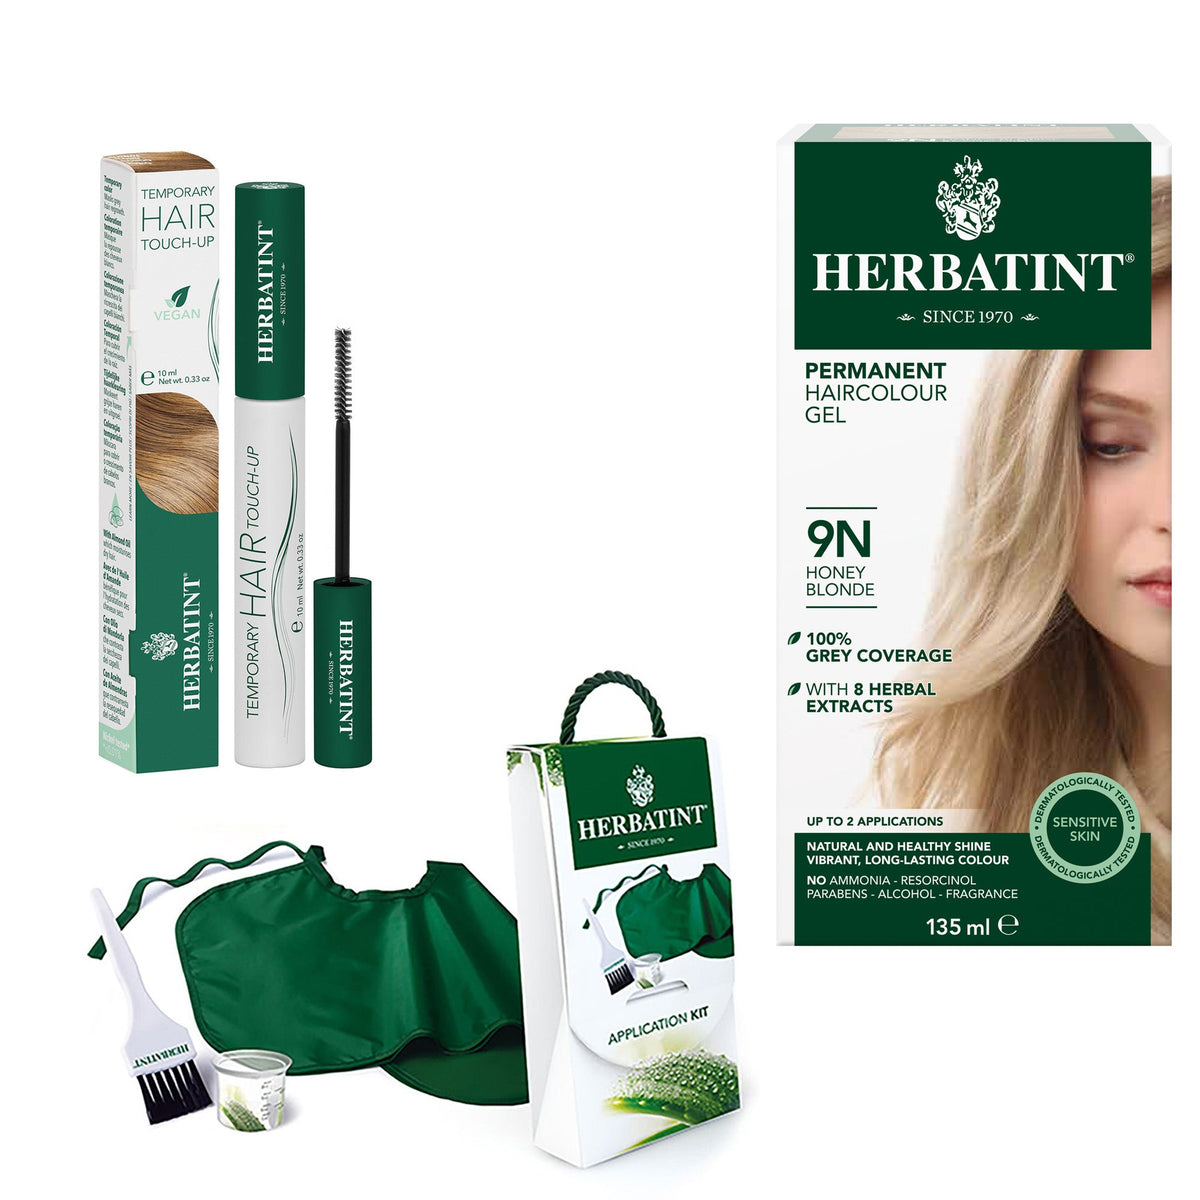 Blonde Permanent Haircolour Gel, Root Touch-up and application Kit Value Bundle - A.Vogel Canada